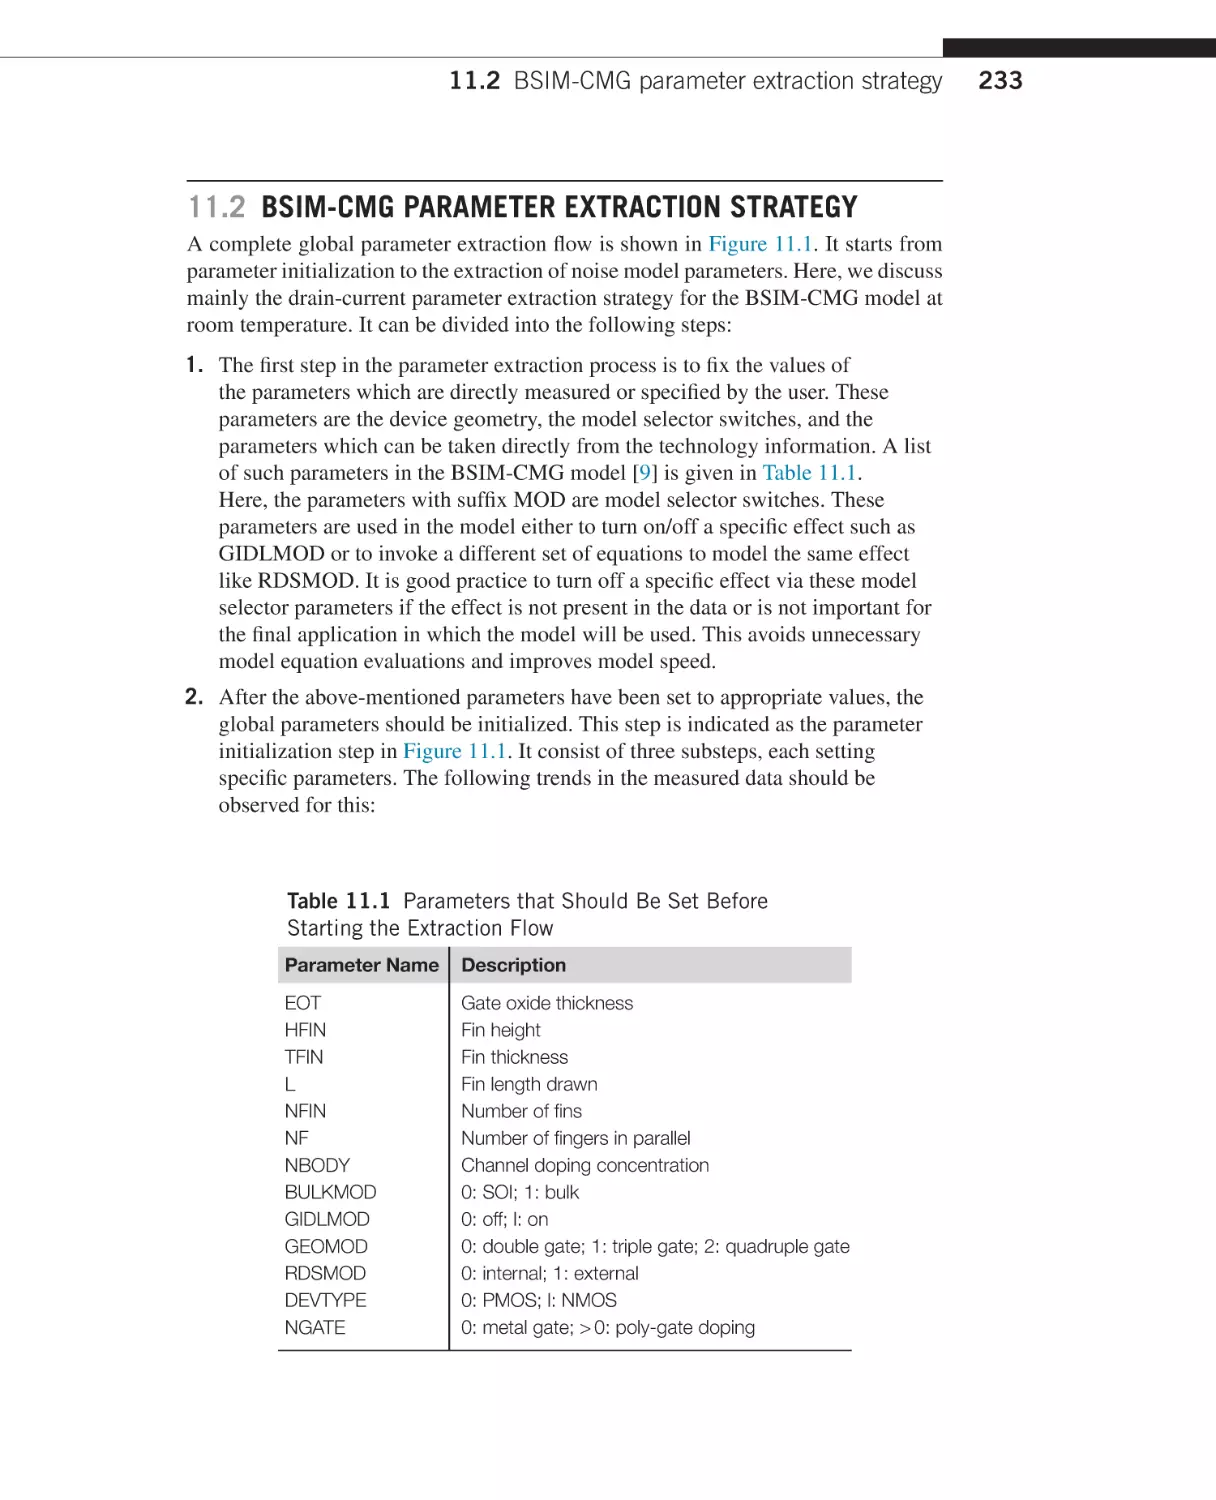 BSIM-CMG parameter extraction strategy